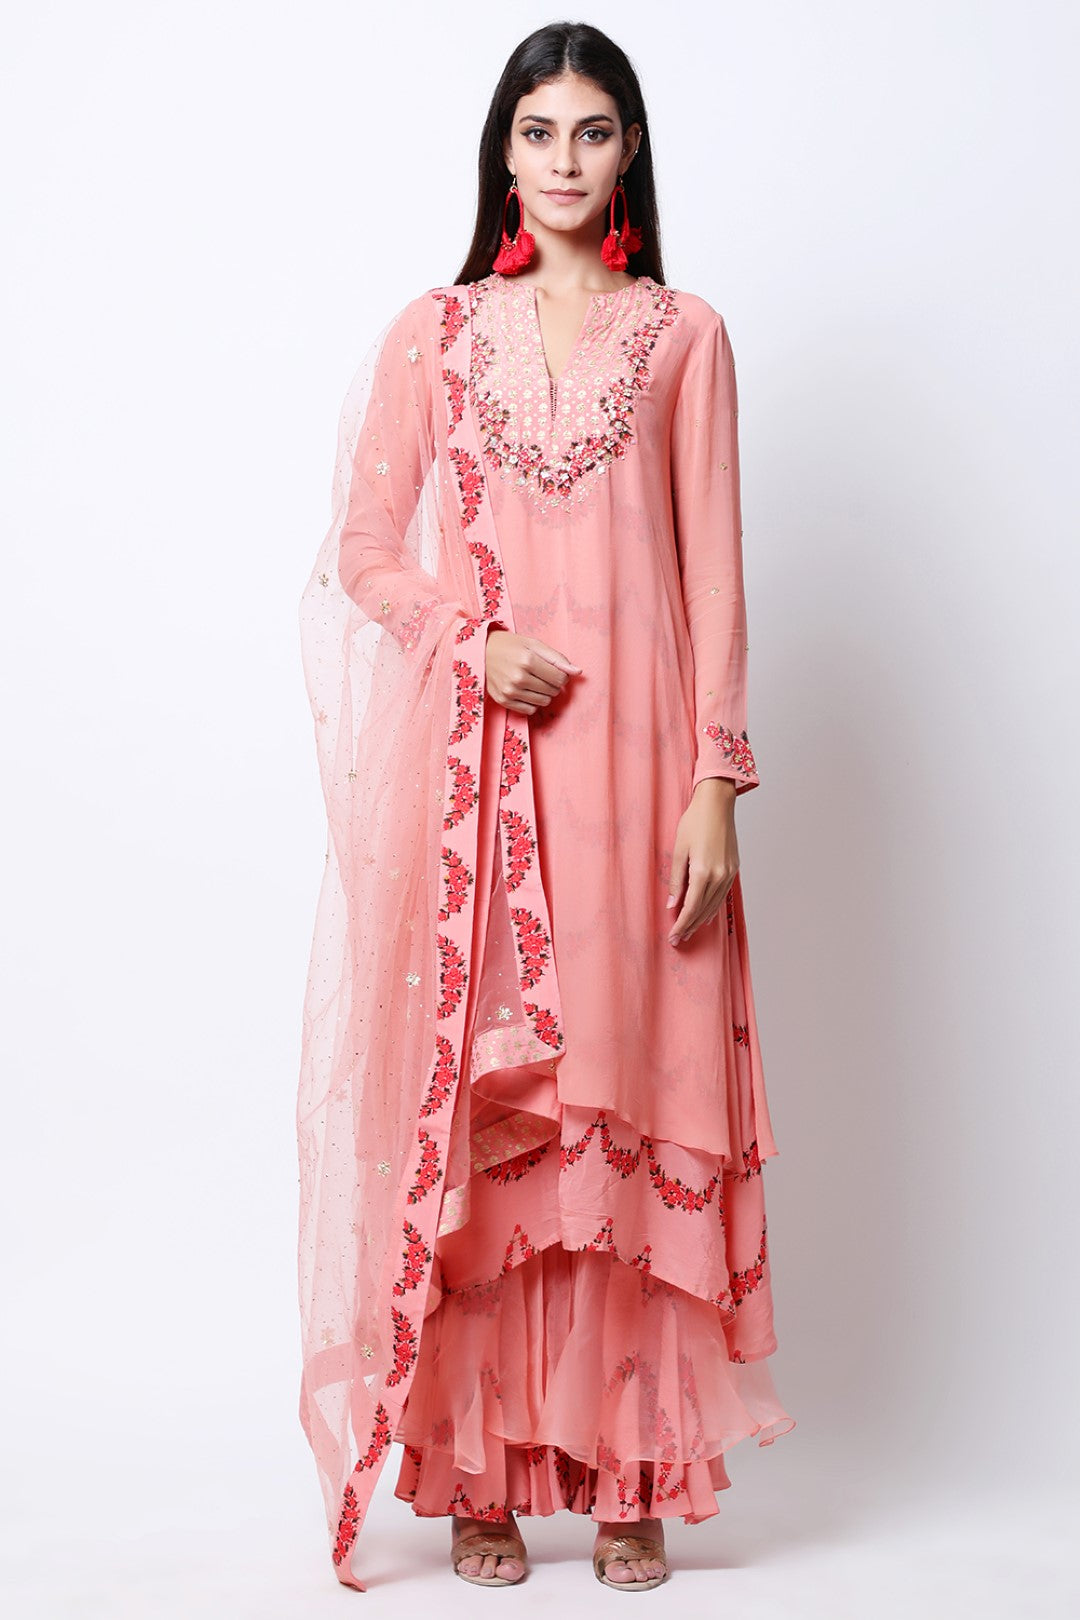 Vintage Rose scallop double layered embellished asymmetric tunic with mukesh net dupatta and sharara.